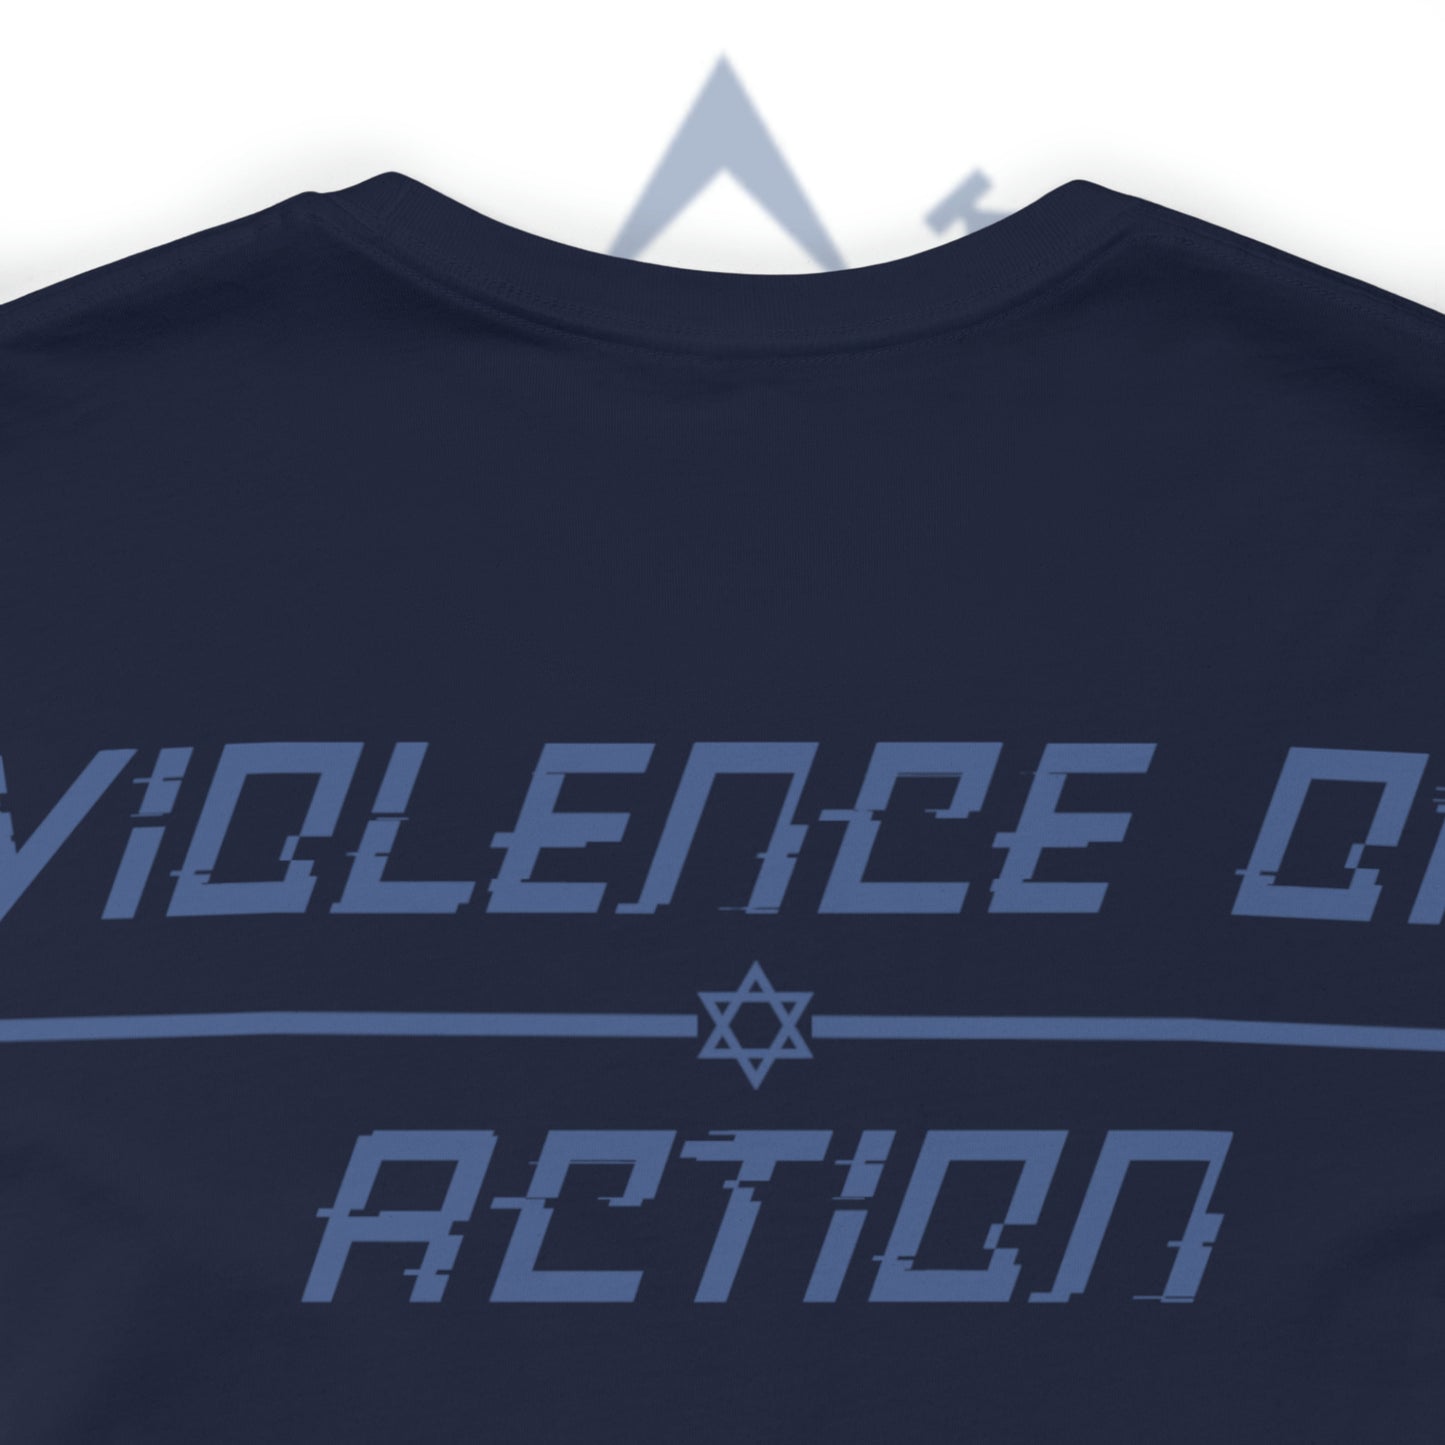 Violence Of Action Blue Unisex Short Sleeve Tee